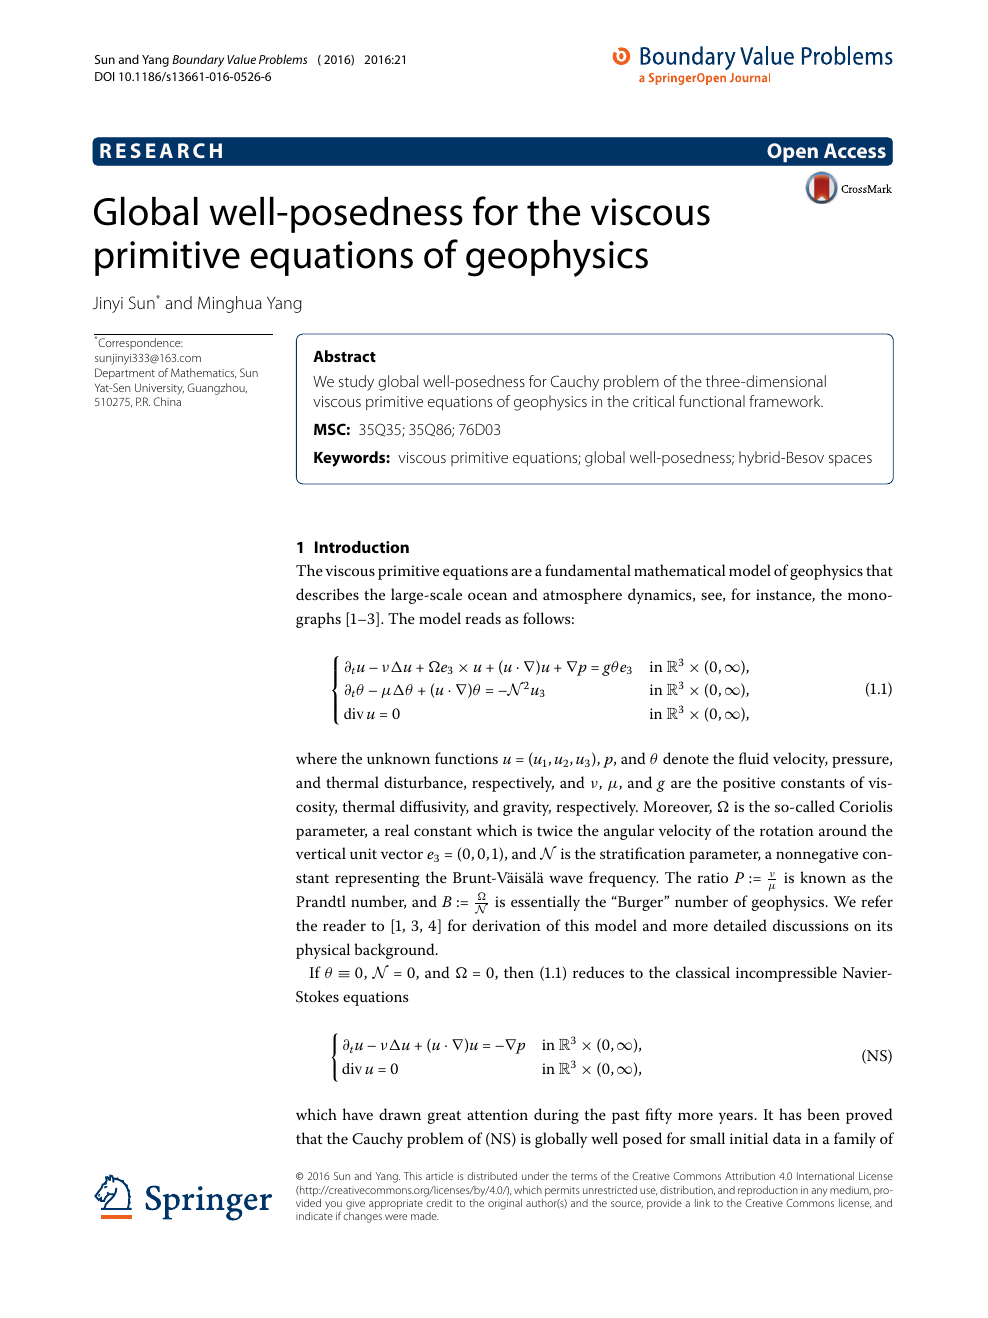 Global Well Posedness For The Viscous Primitive Equations Of Geophysics Topic Of Research Paper In Mathematics Download Scholarly Article Pdf And Read For Free On Cyberleninka Open Science Hub